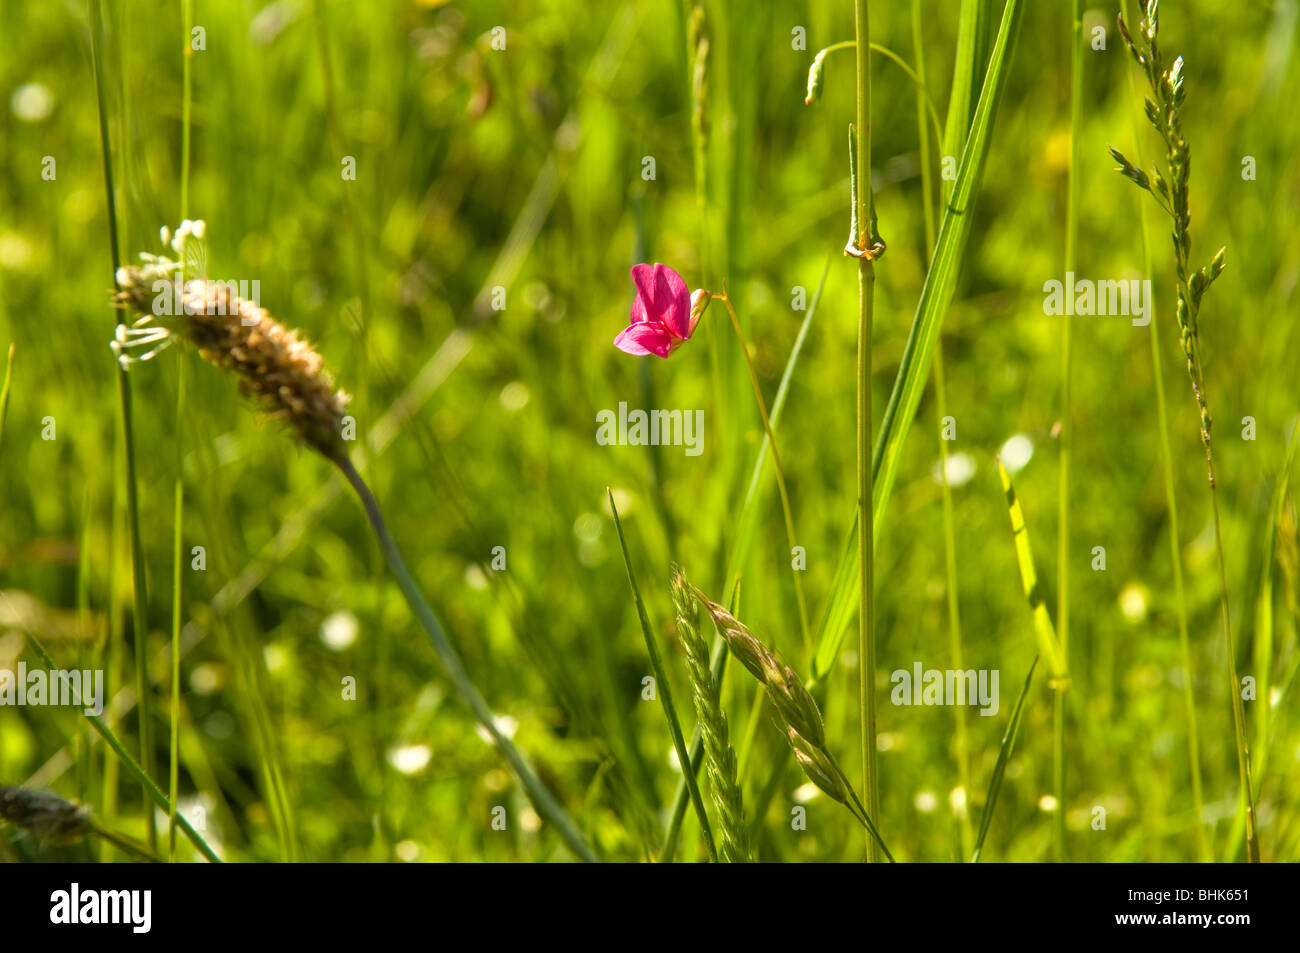 Lesser Snapdragon (Misopates orontium) growing in a grassy meadow Stock Photo